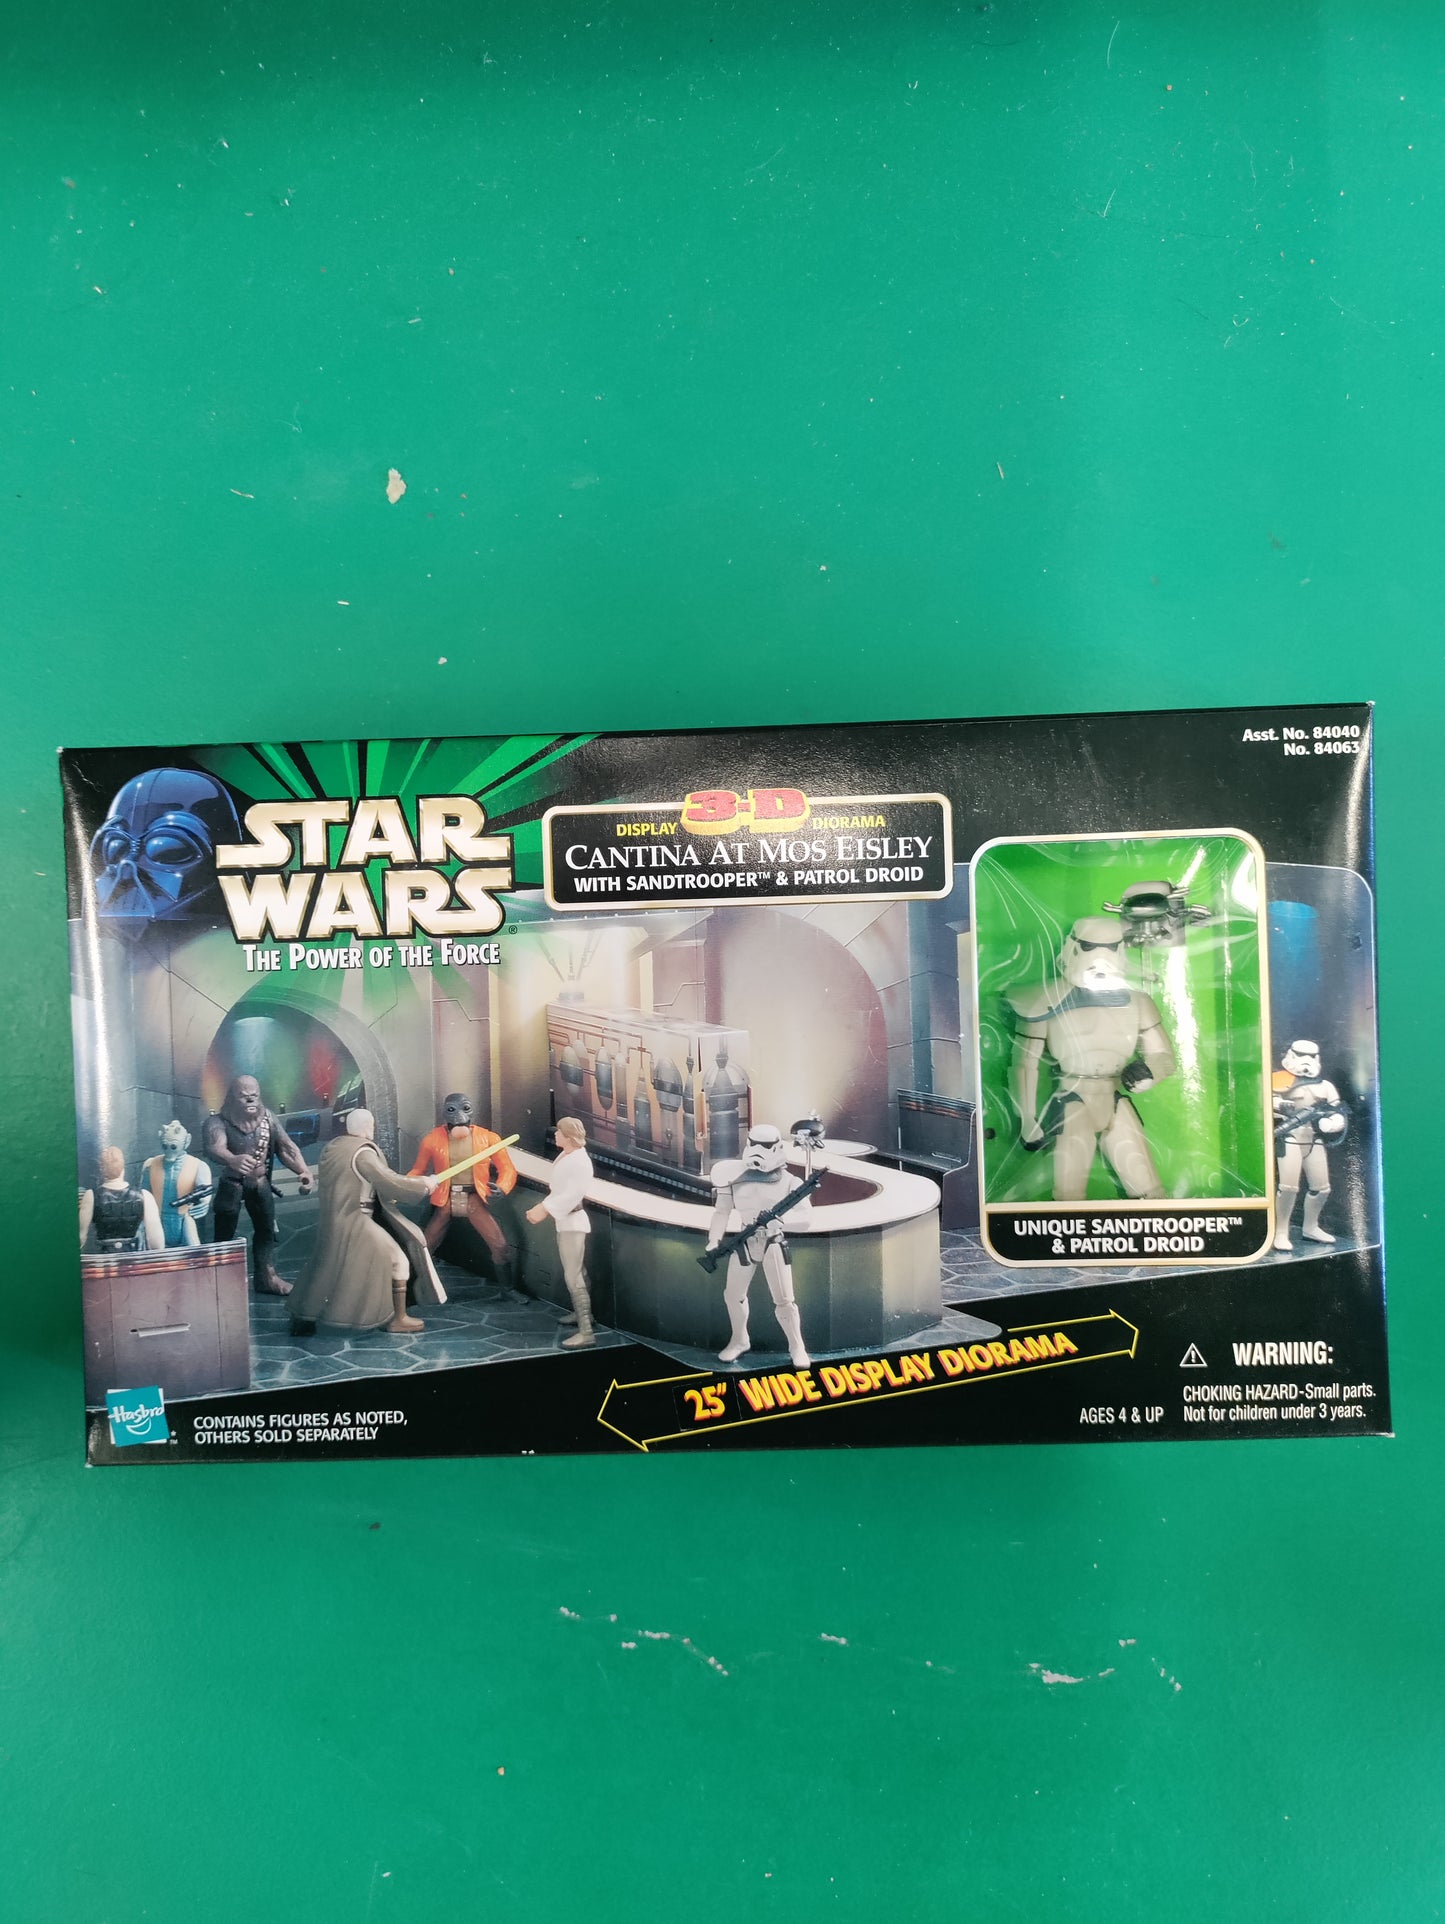 Star Wars The Power Of The Force Cantina At Mos Eisley With Sandtropper & Patrol Droid